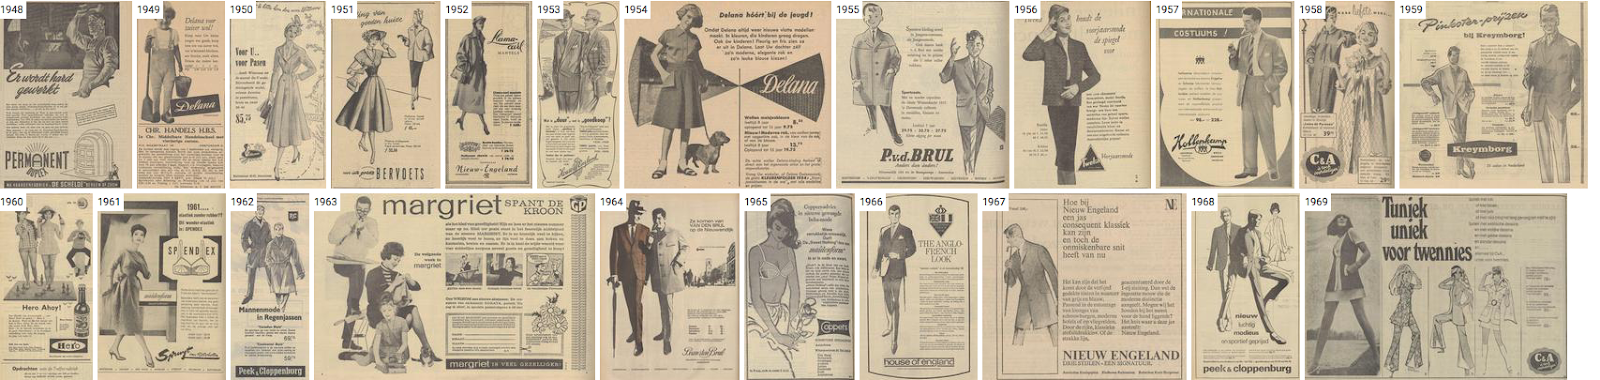 Figure 1. SIAMESE timeline view for fashion advertisements